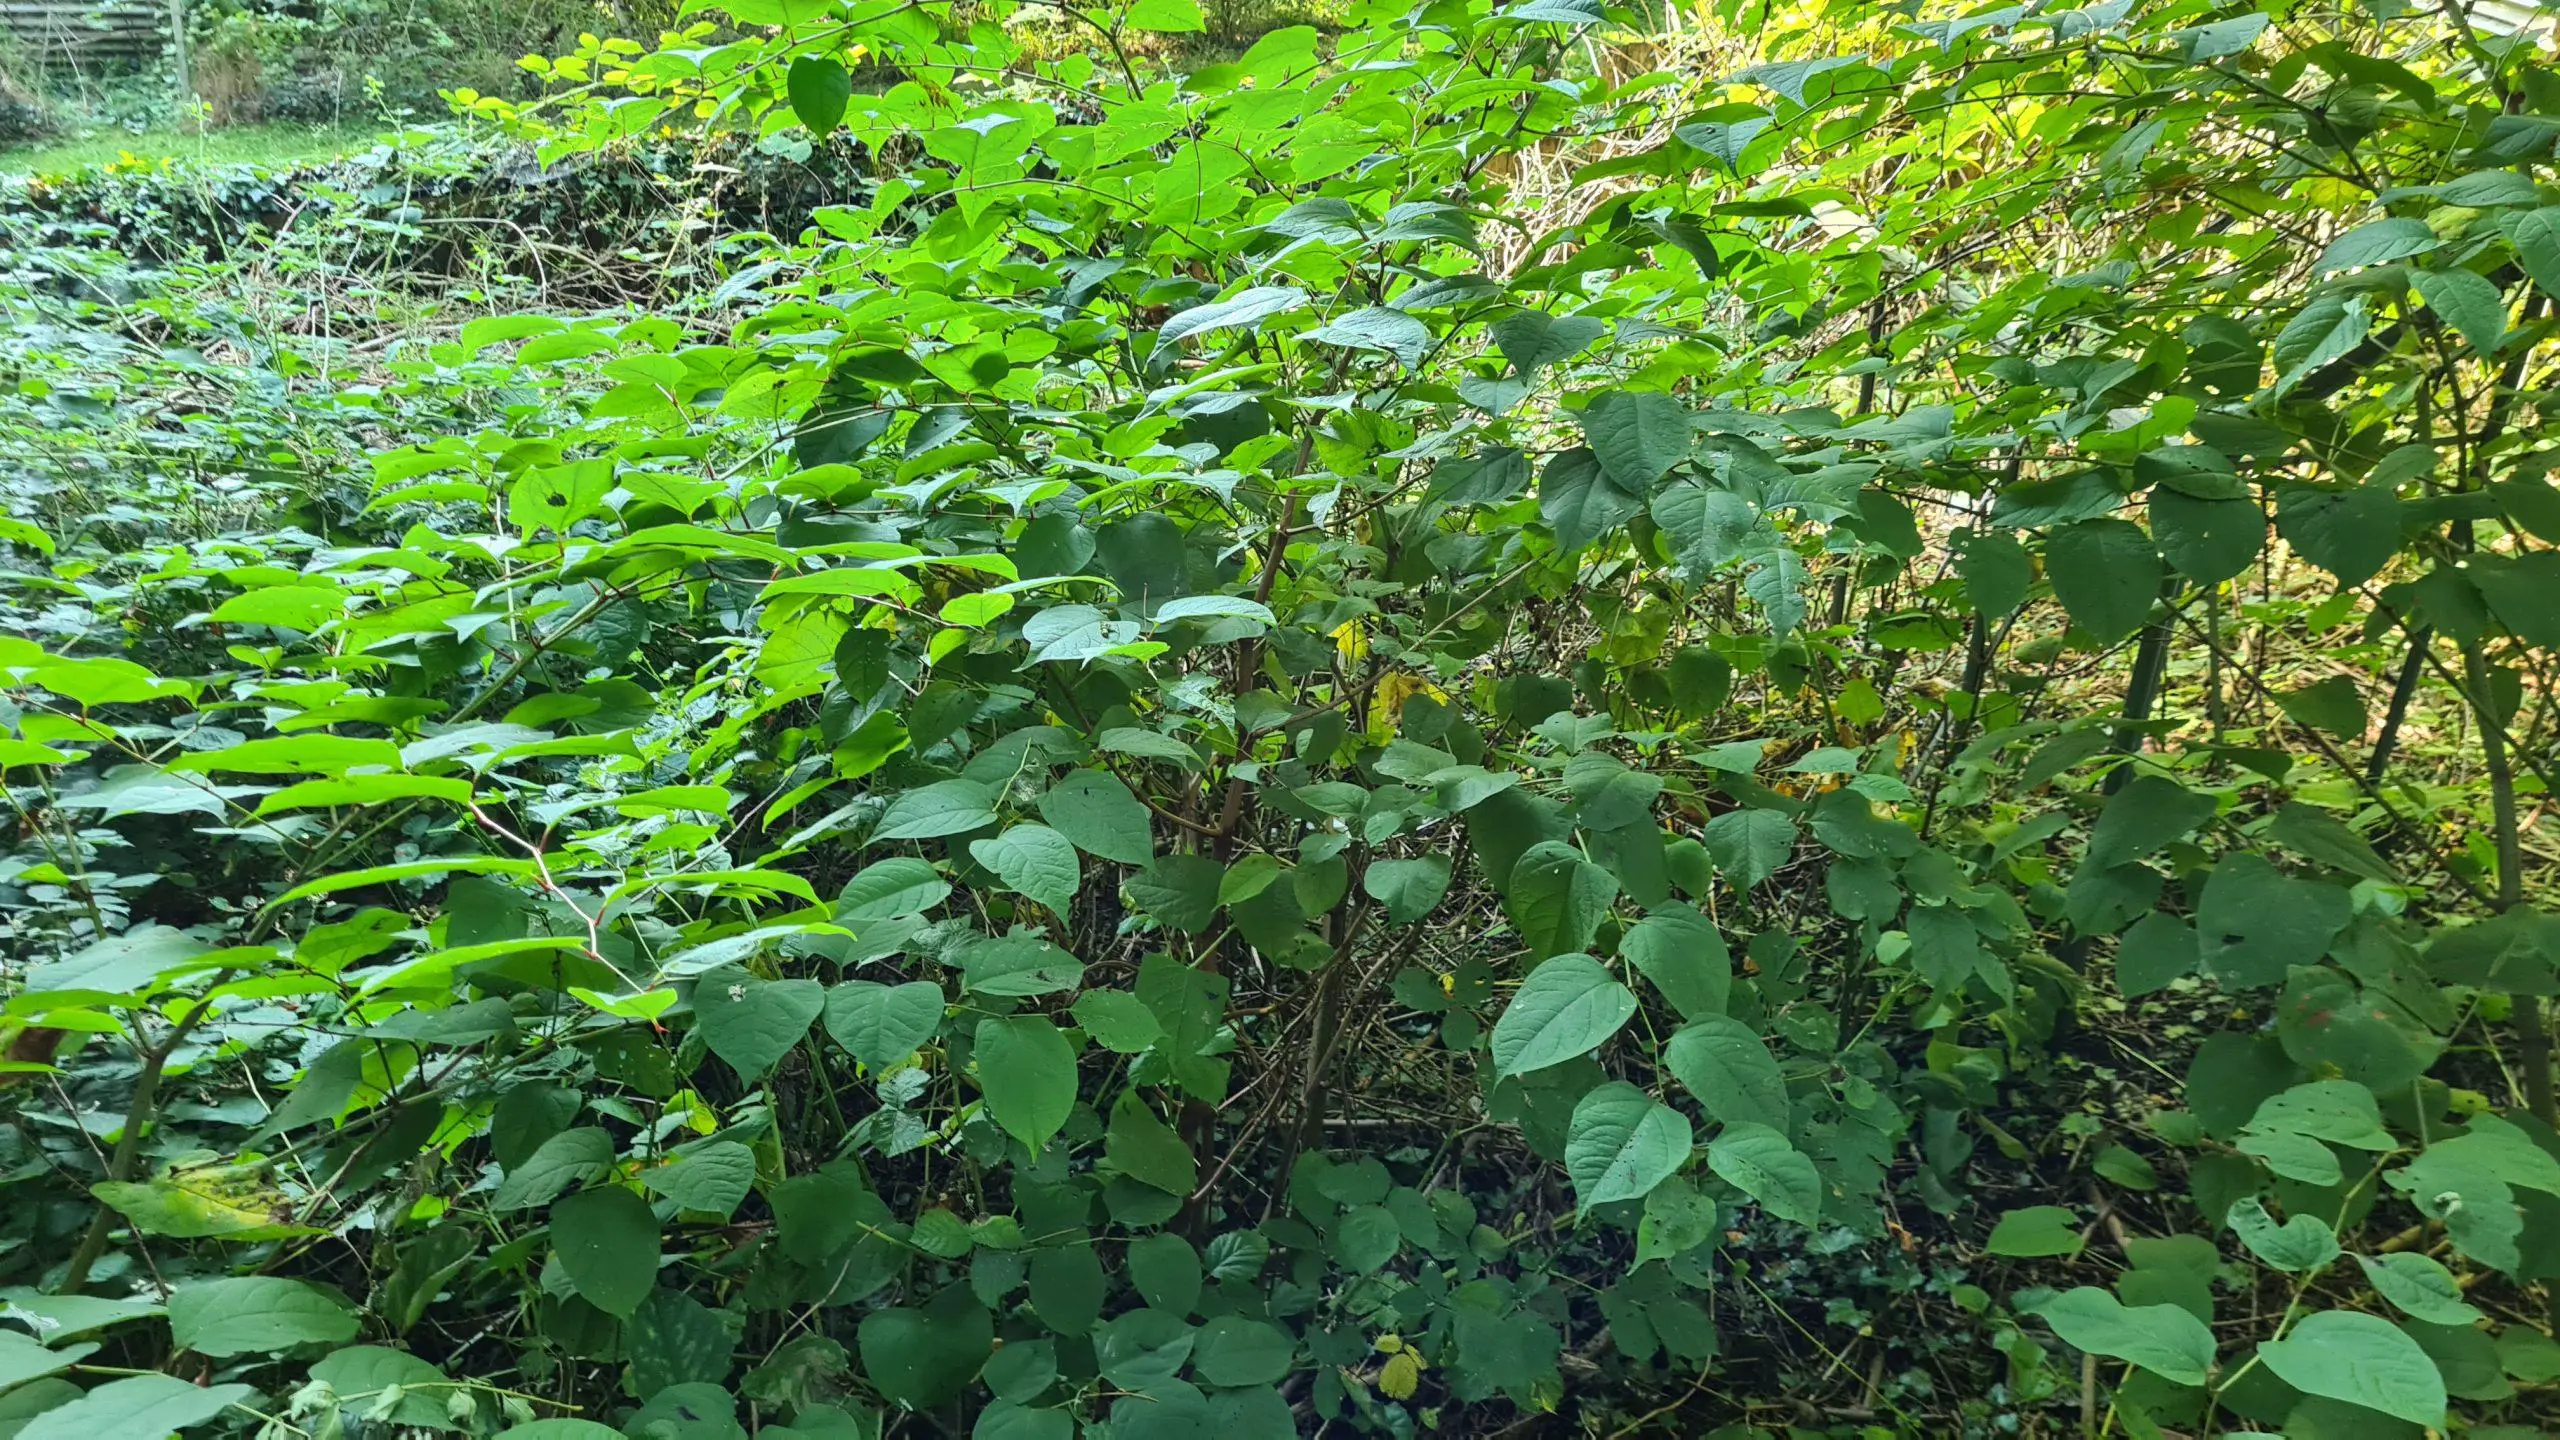 Japanese knotweed growing in mid June and nearly mature ahead of the end of Summer